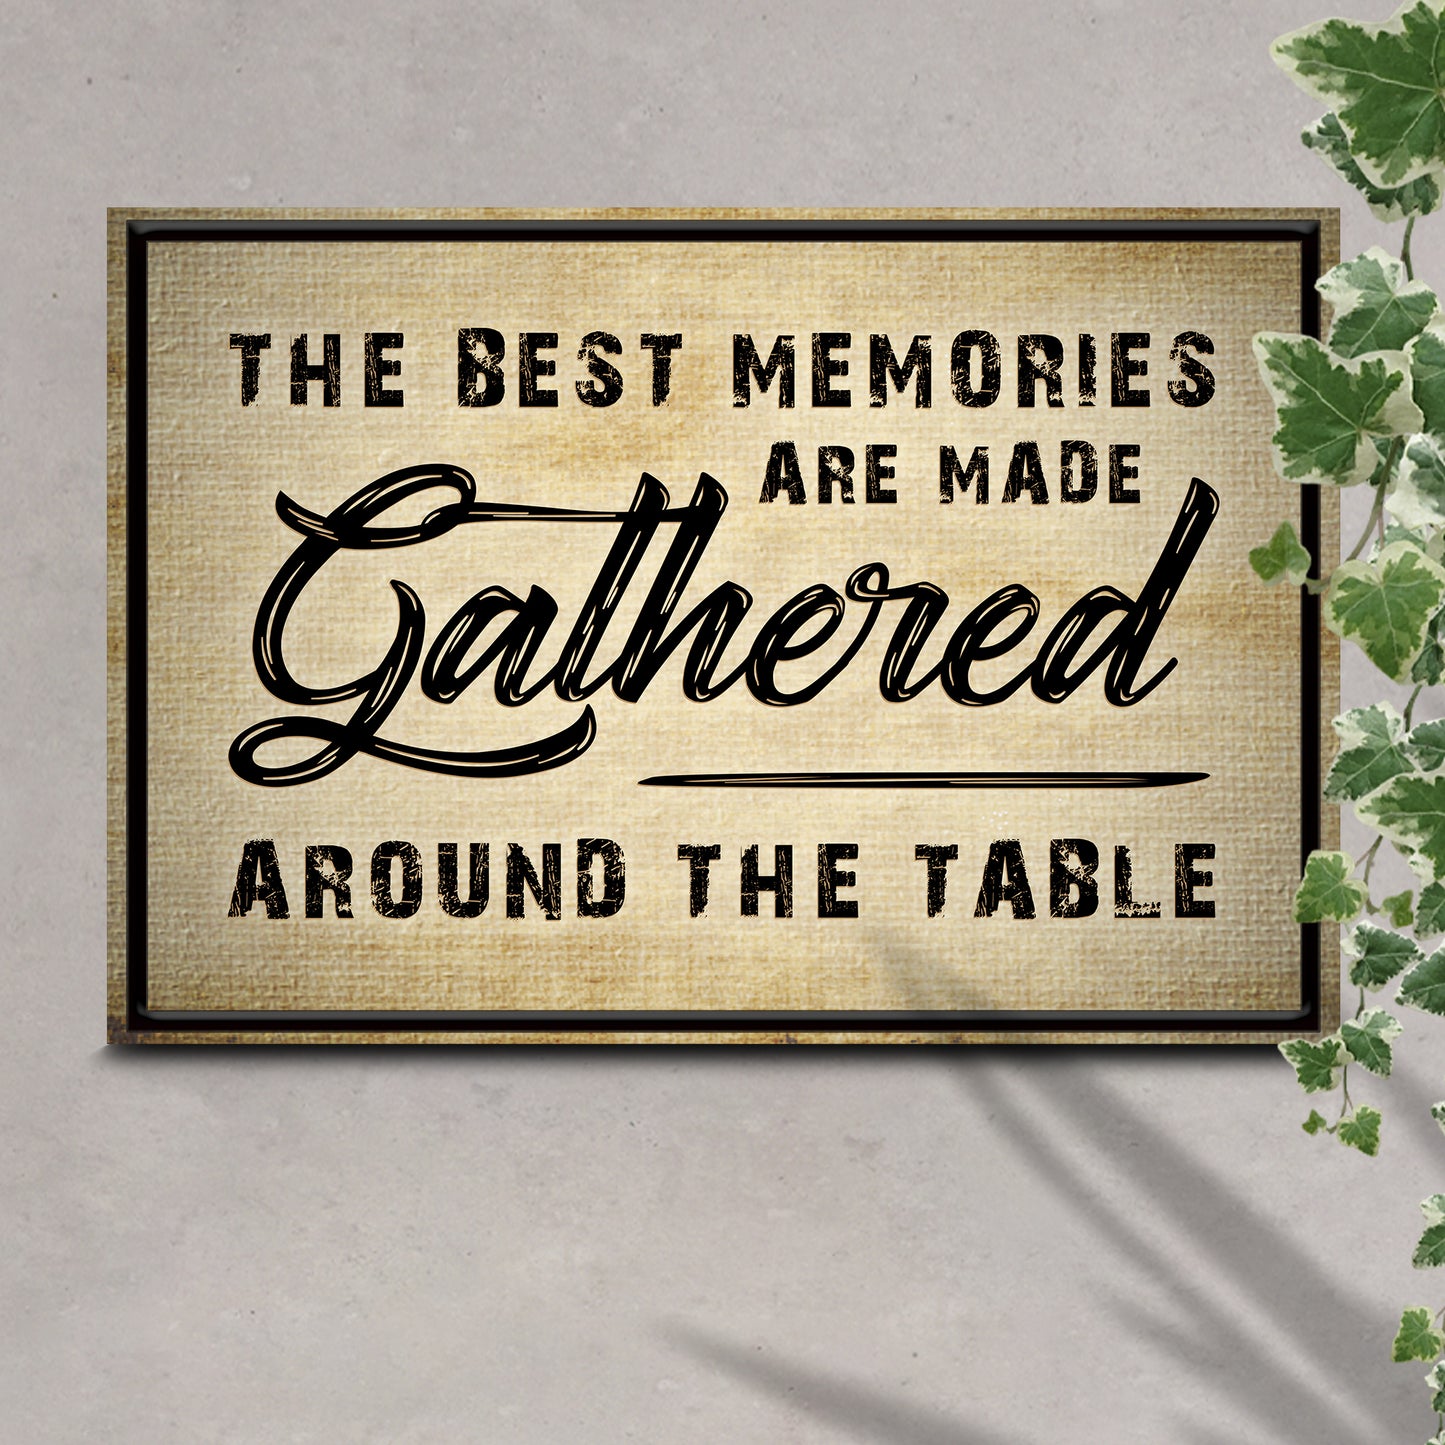 The Best Memories Are Made Gathered Around The Table Sign III Style 1 - Image by Tailored Canvases